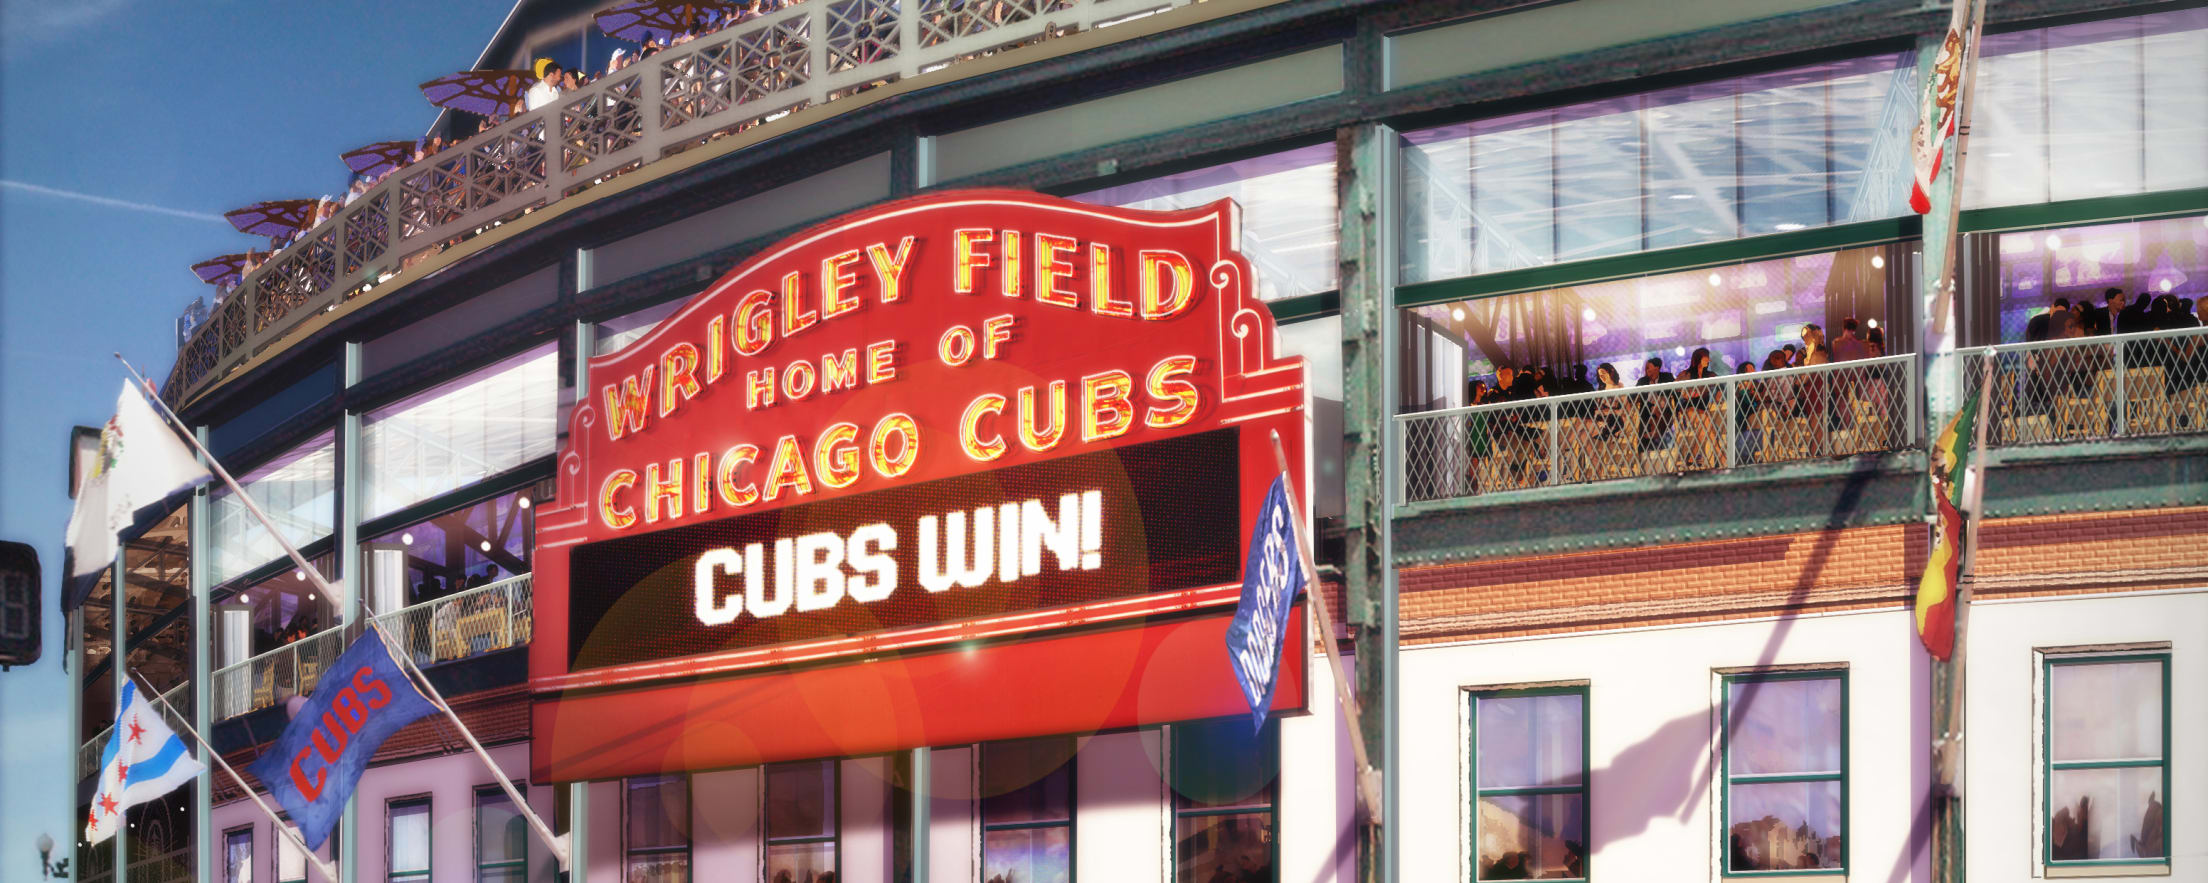 Under Cubstruction: CEE Alumnus Leads Restoration Project for Wrigley Field, Civil & Environmental Engineering